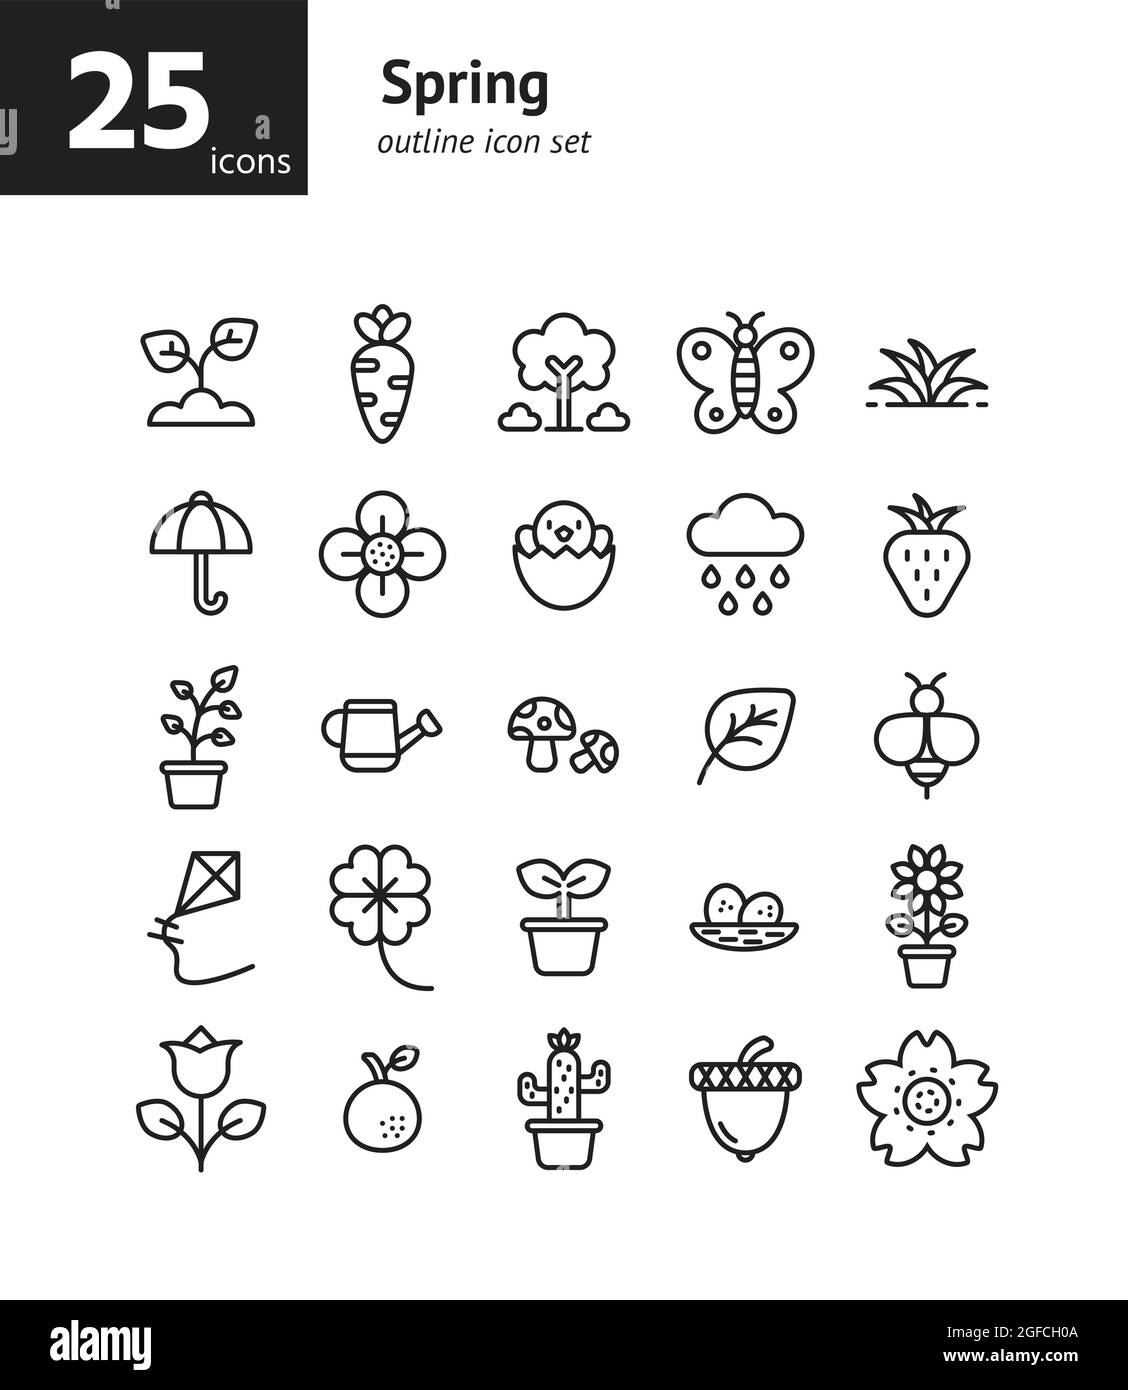 Spring outline icon set. Vector and Illustration. Stock Vector